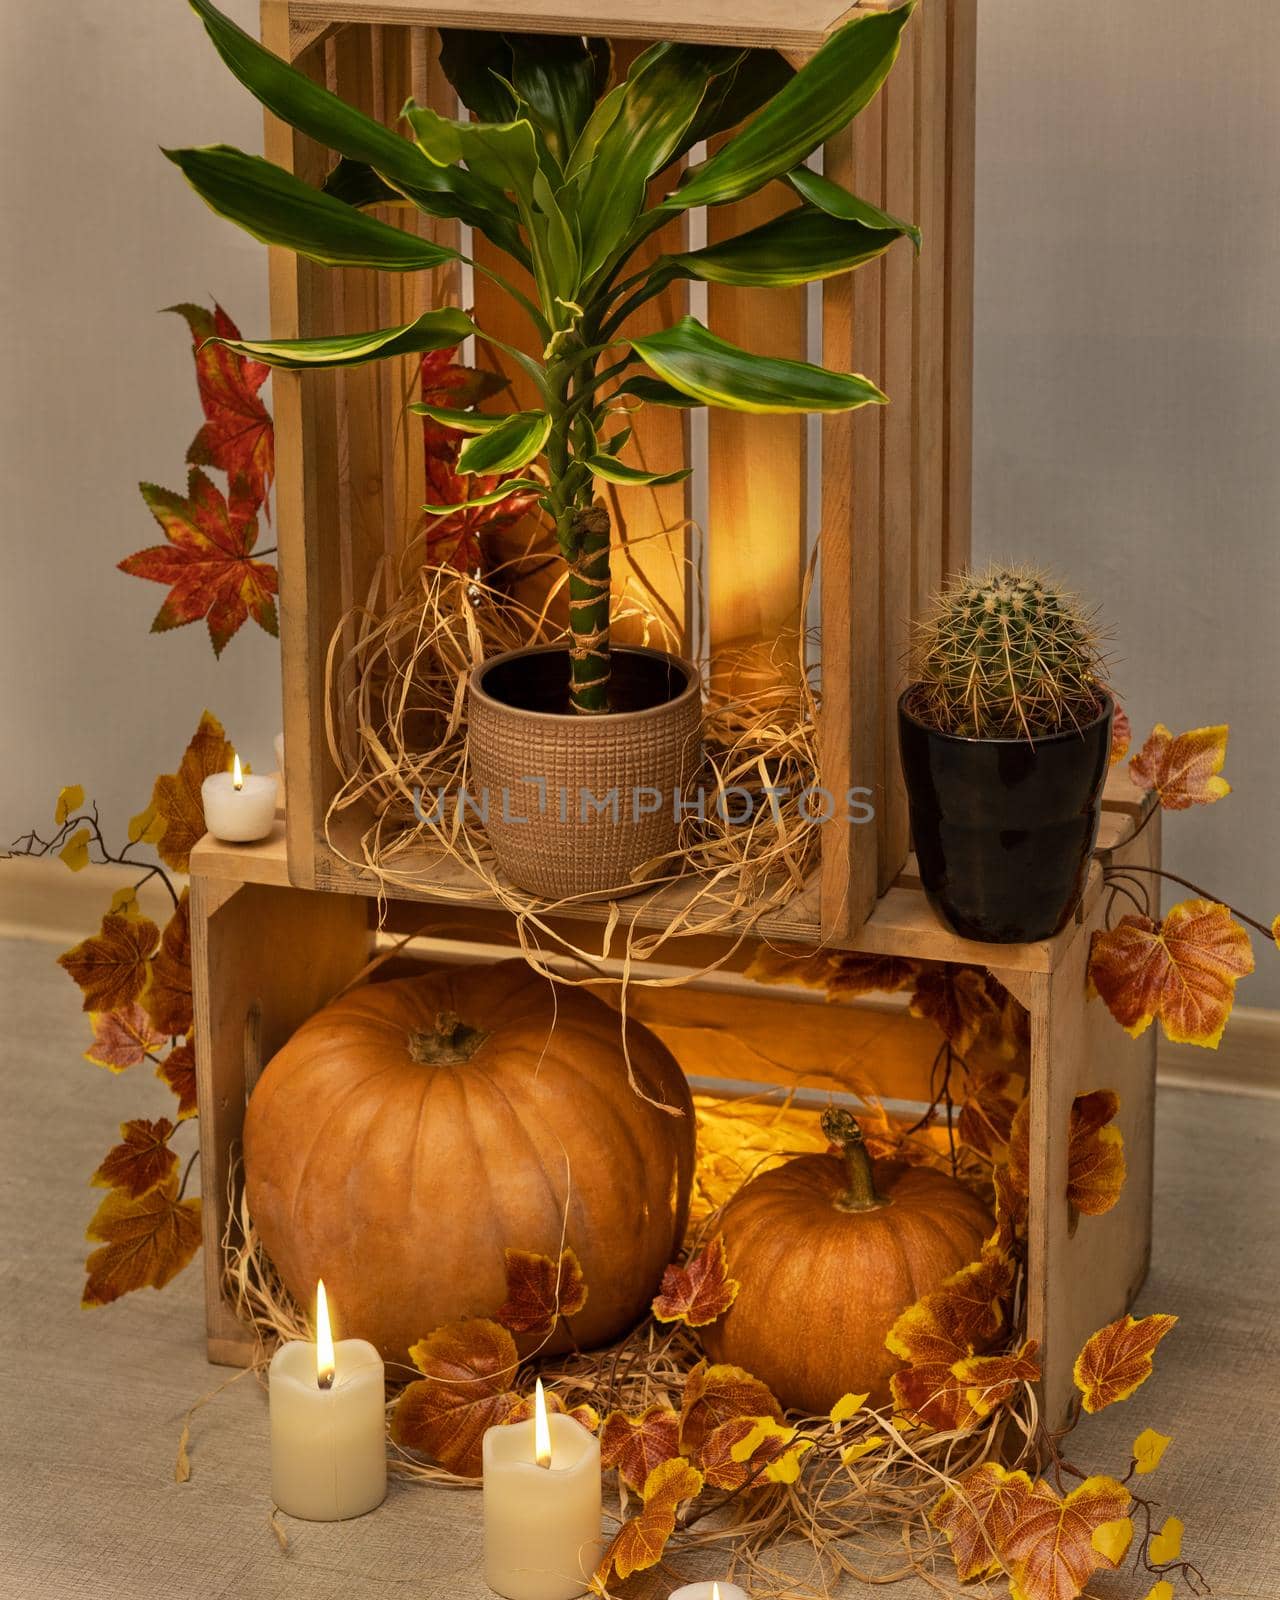 Halloween Pumpkins in the wooden crates with candles, Dracaena fragrans Golden Coast, cactus